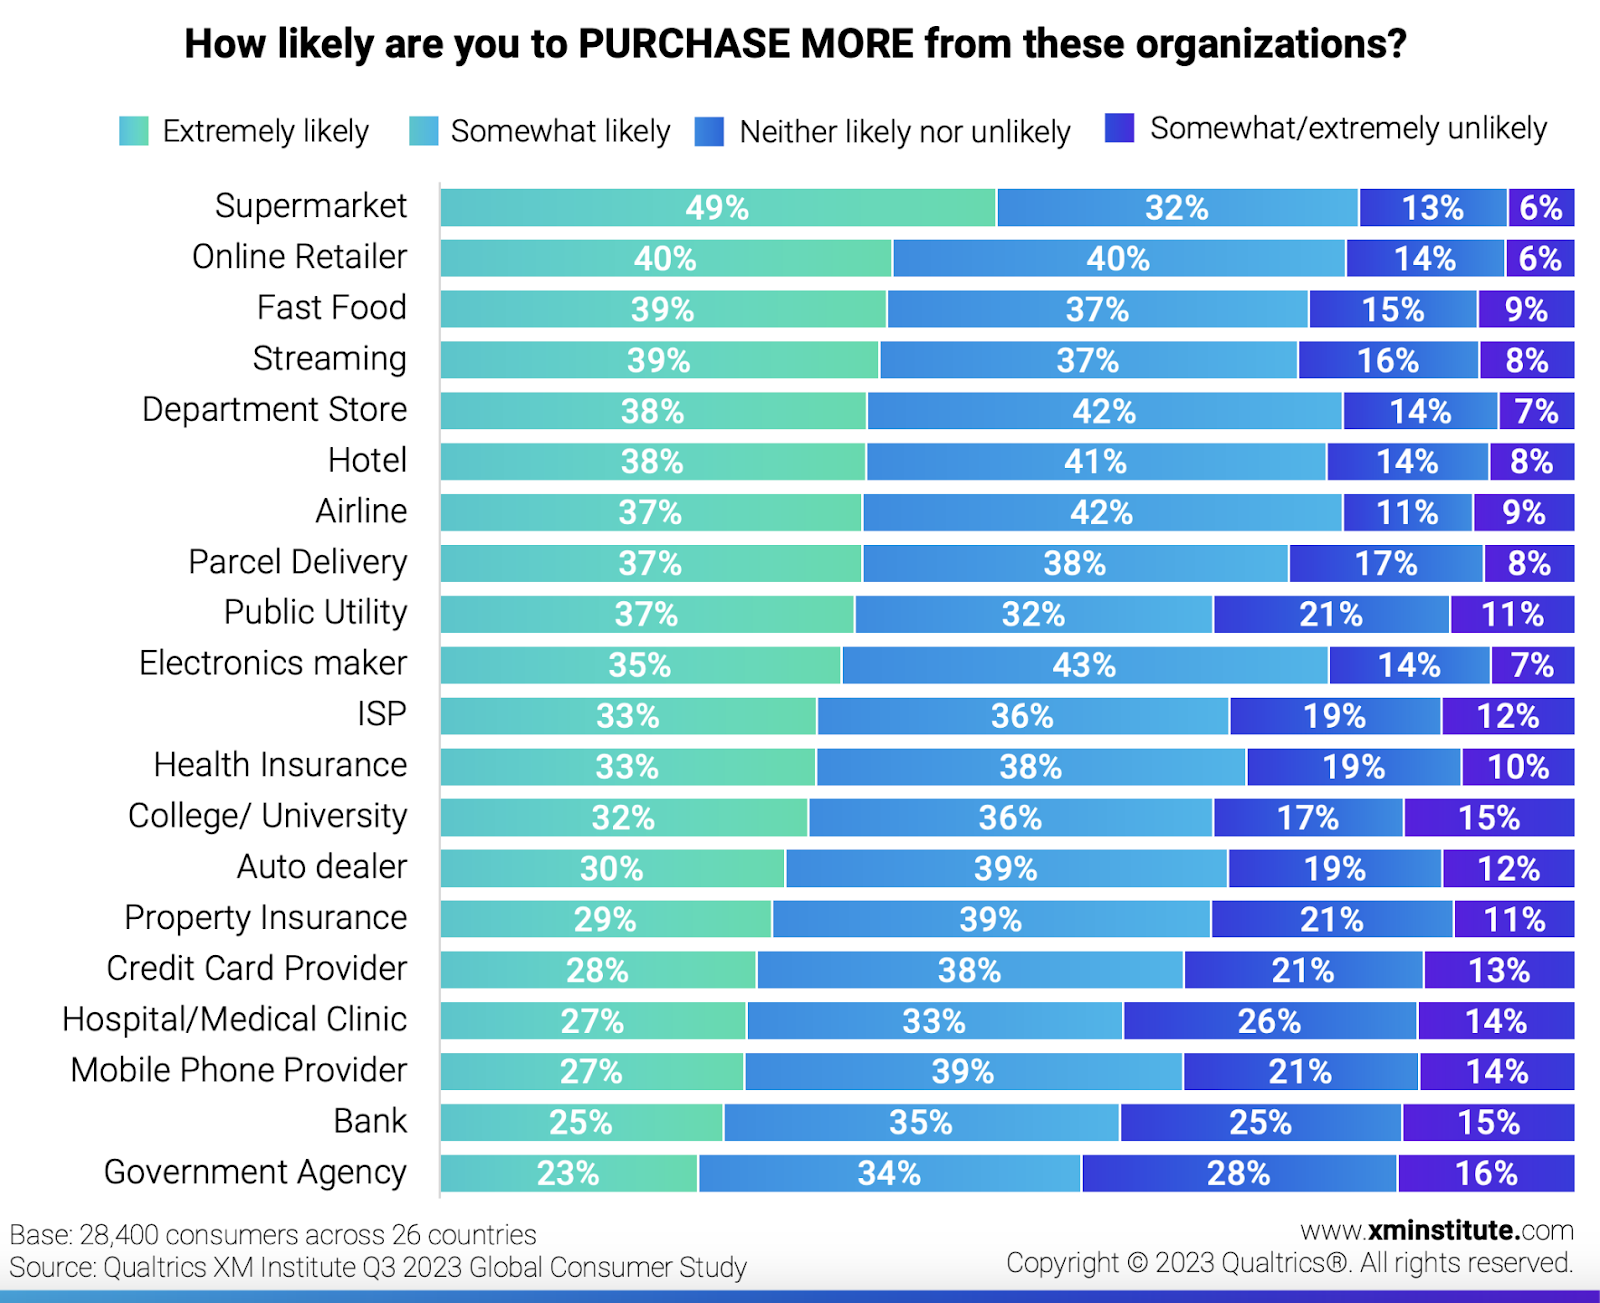 XM Institute's survey results asking how likely customers are to purchase more from listed organizations